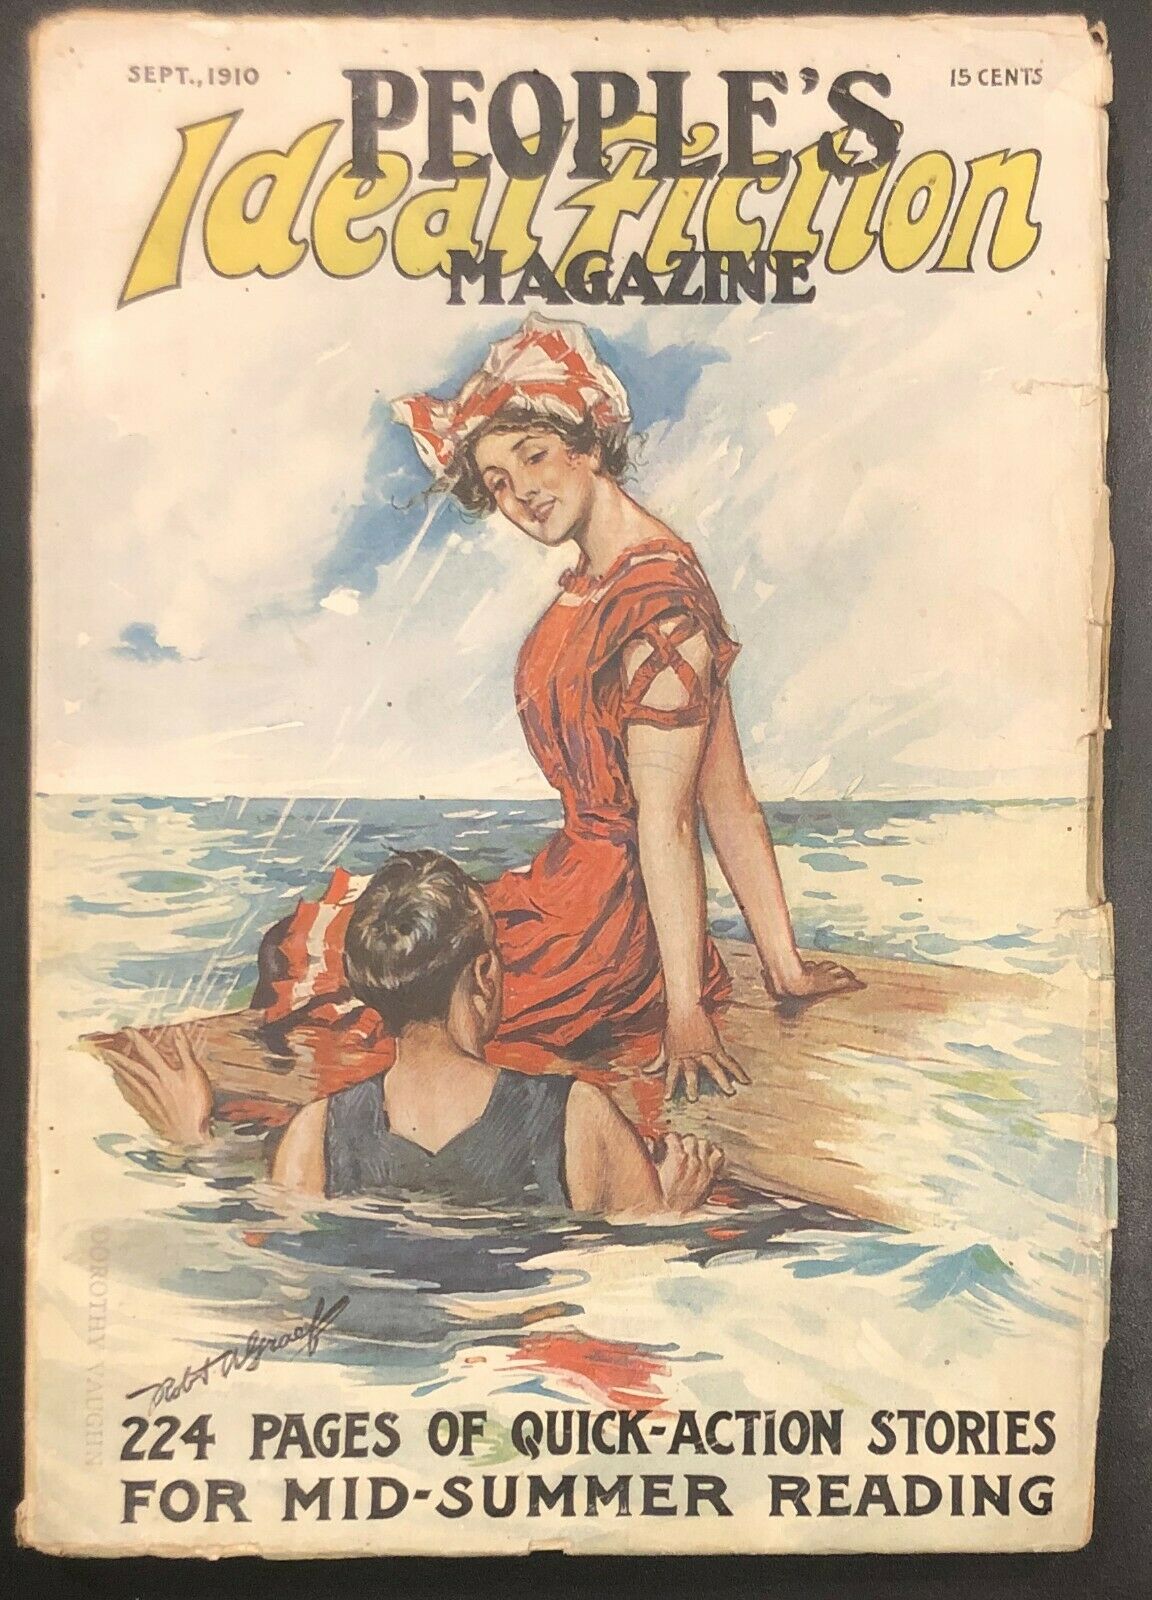 People's Ideal Fiction Magazine - September 1910